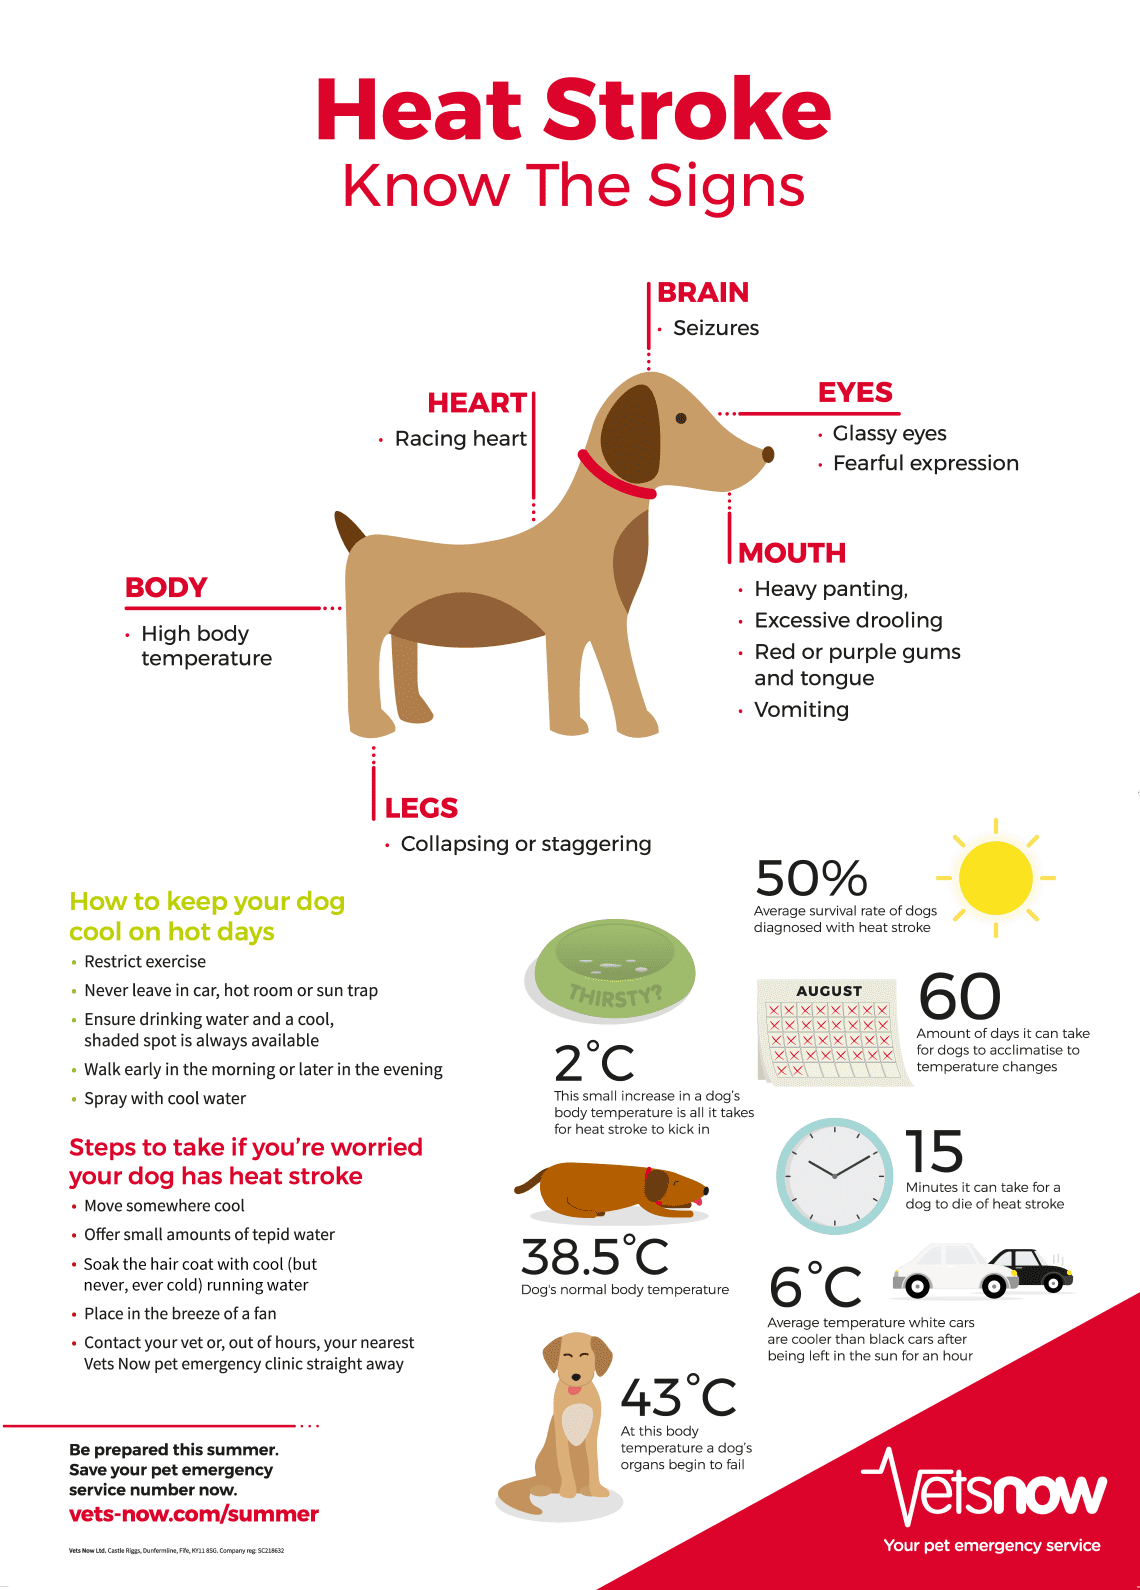 Heat exhaustion and heat stroke in dogs